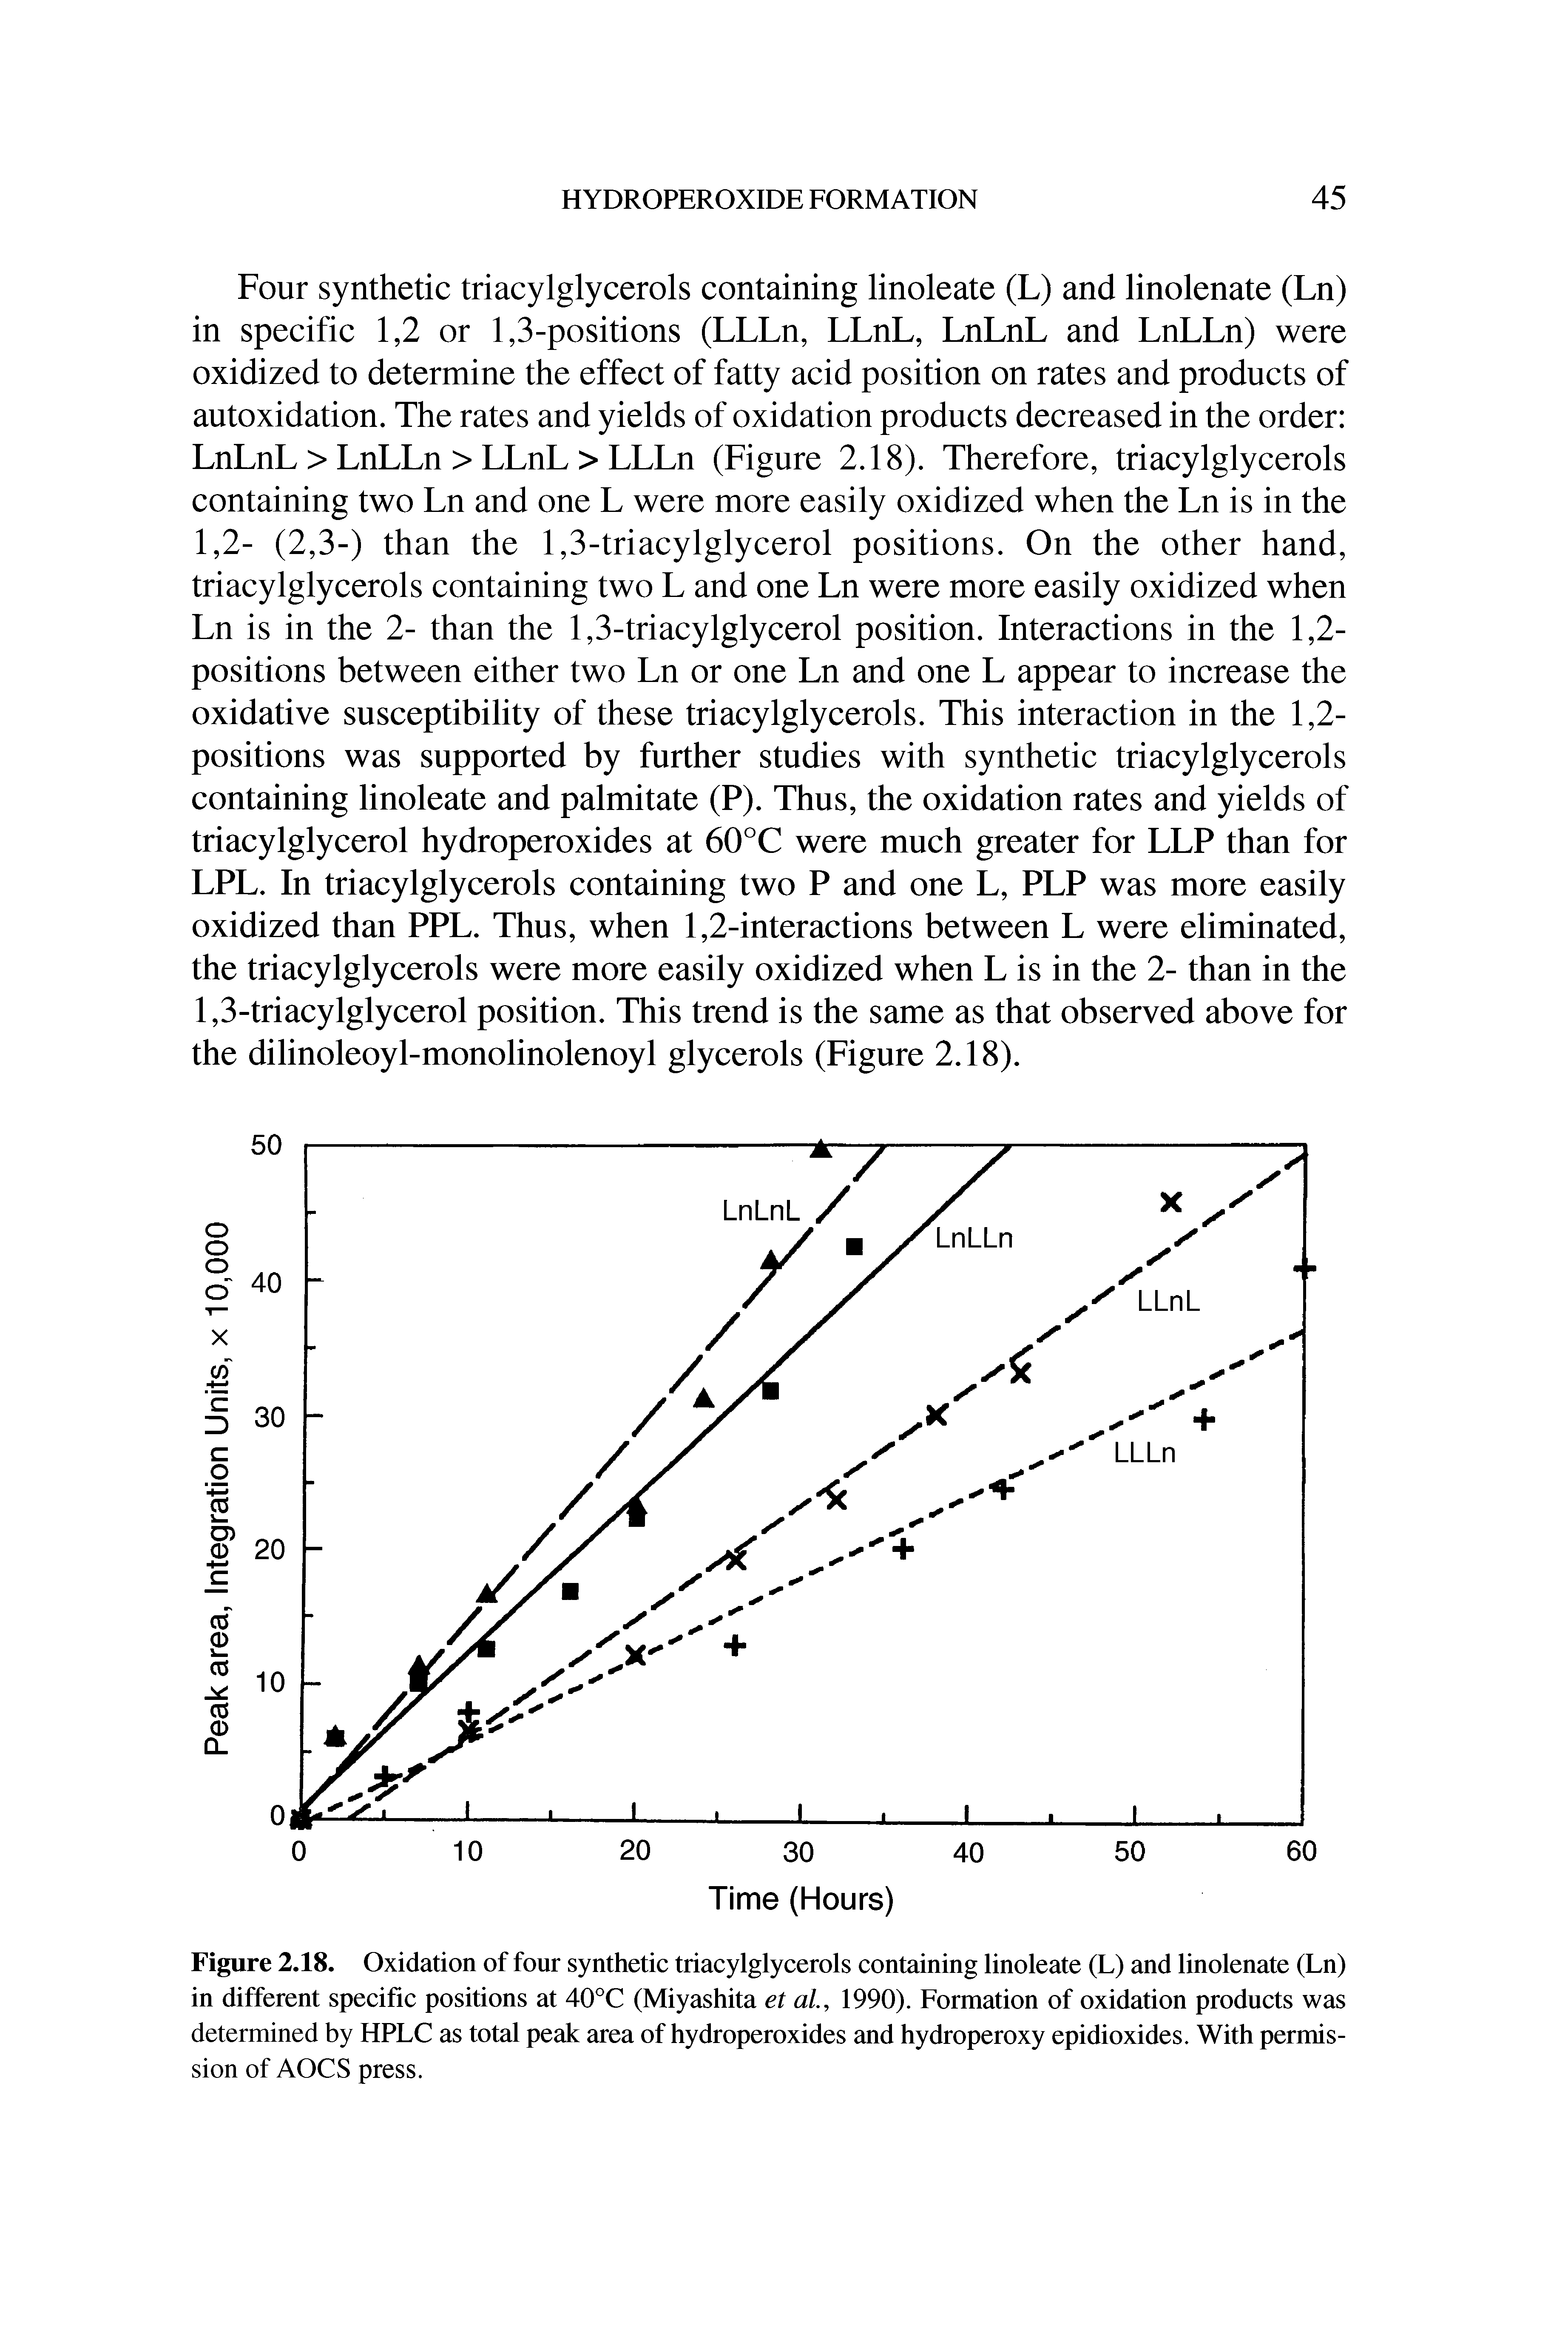 Figure 2.18. Oxidation of four synthetic triacylglycerols containing linoleate (L) and linolenate (Ln) in different specific positions at 40°C (Miyashita et al, 1990). Formation of oxidation products was determined by HPLC as total peak area of hydroperoxides and hydroperoxy epidioxides. With permission of AOCS press.